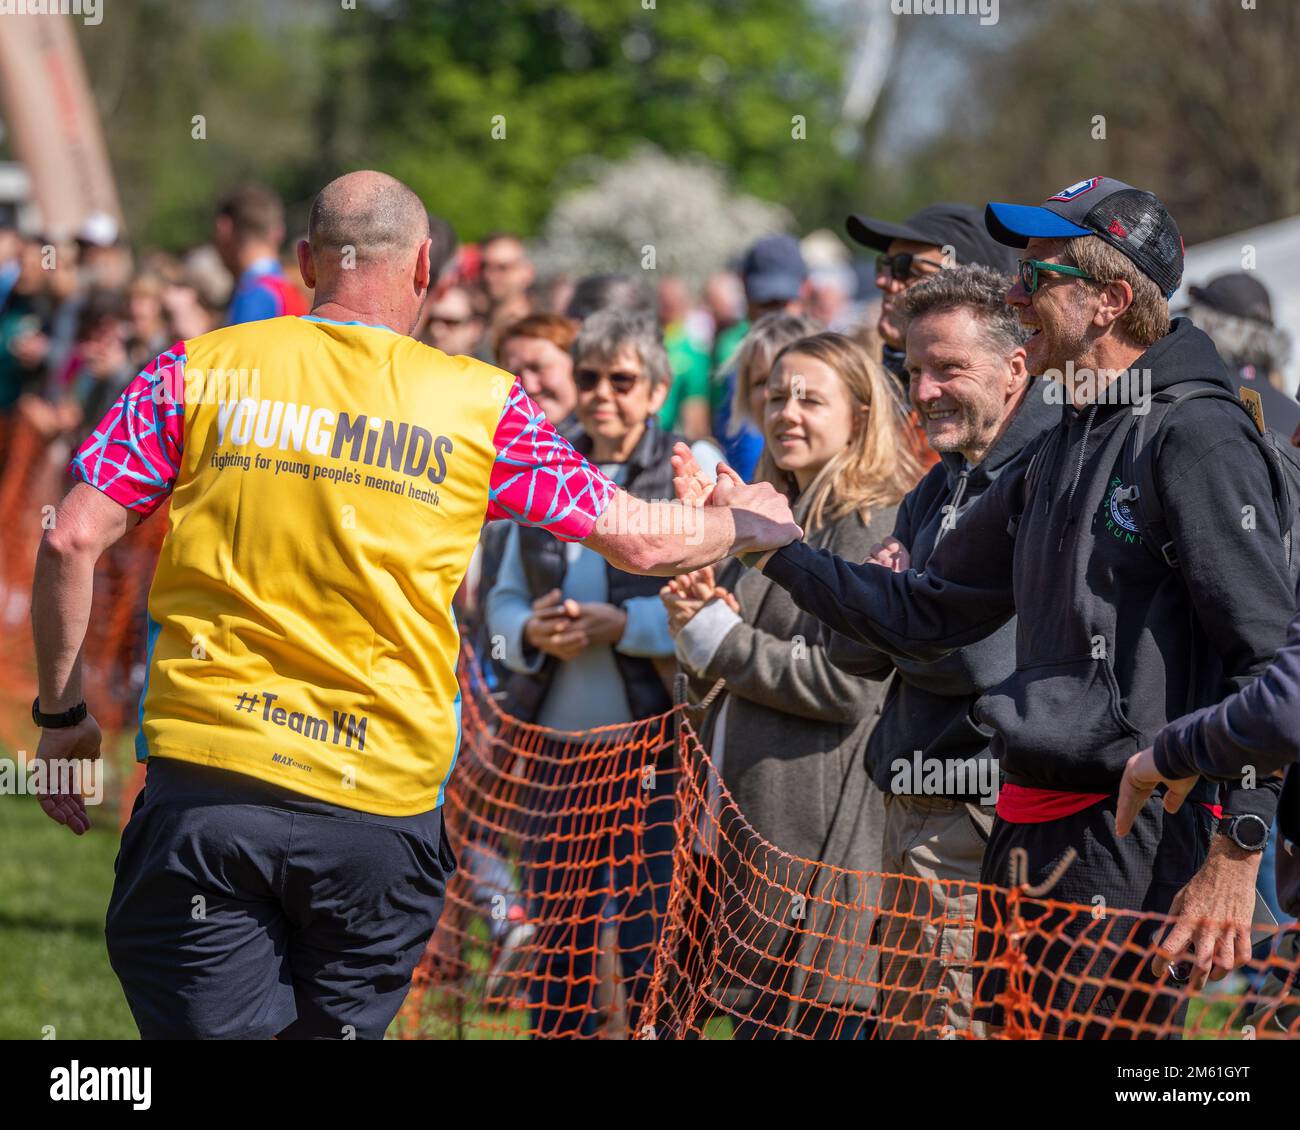 A Young Minds charity marathoner being praised by the watching crowd. Stock Photo